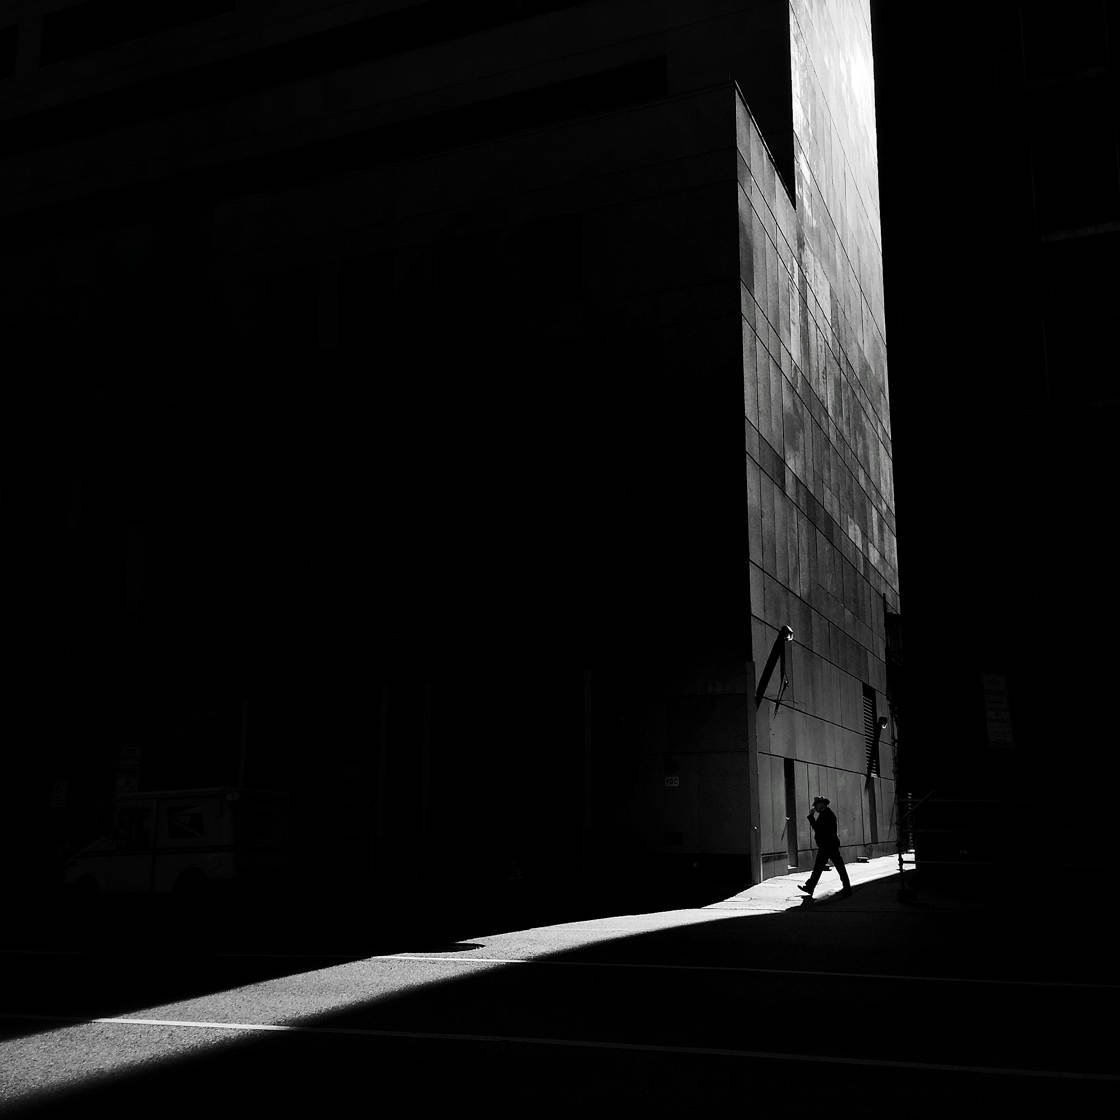 Black and white silhouette photography 21